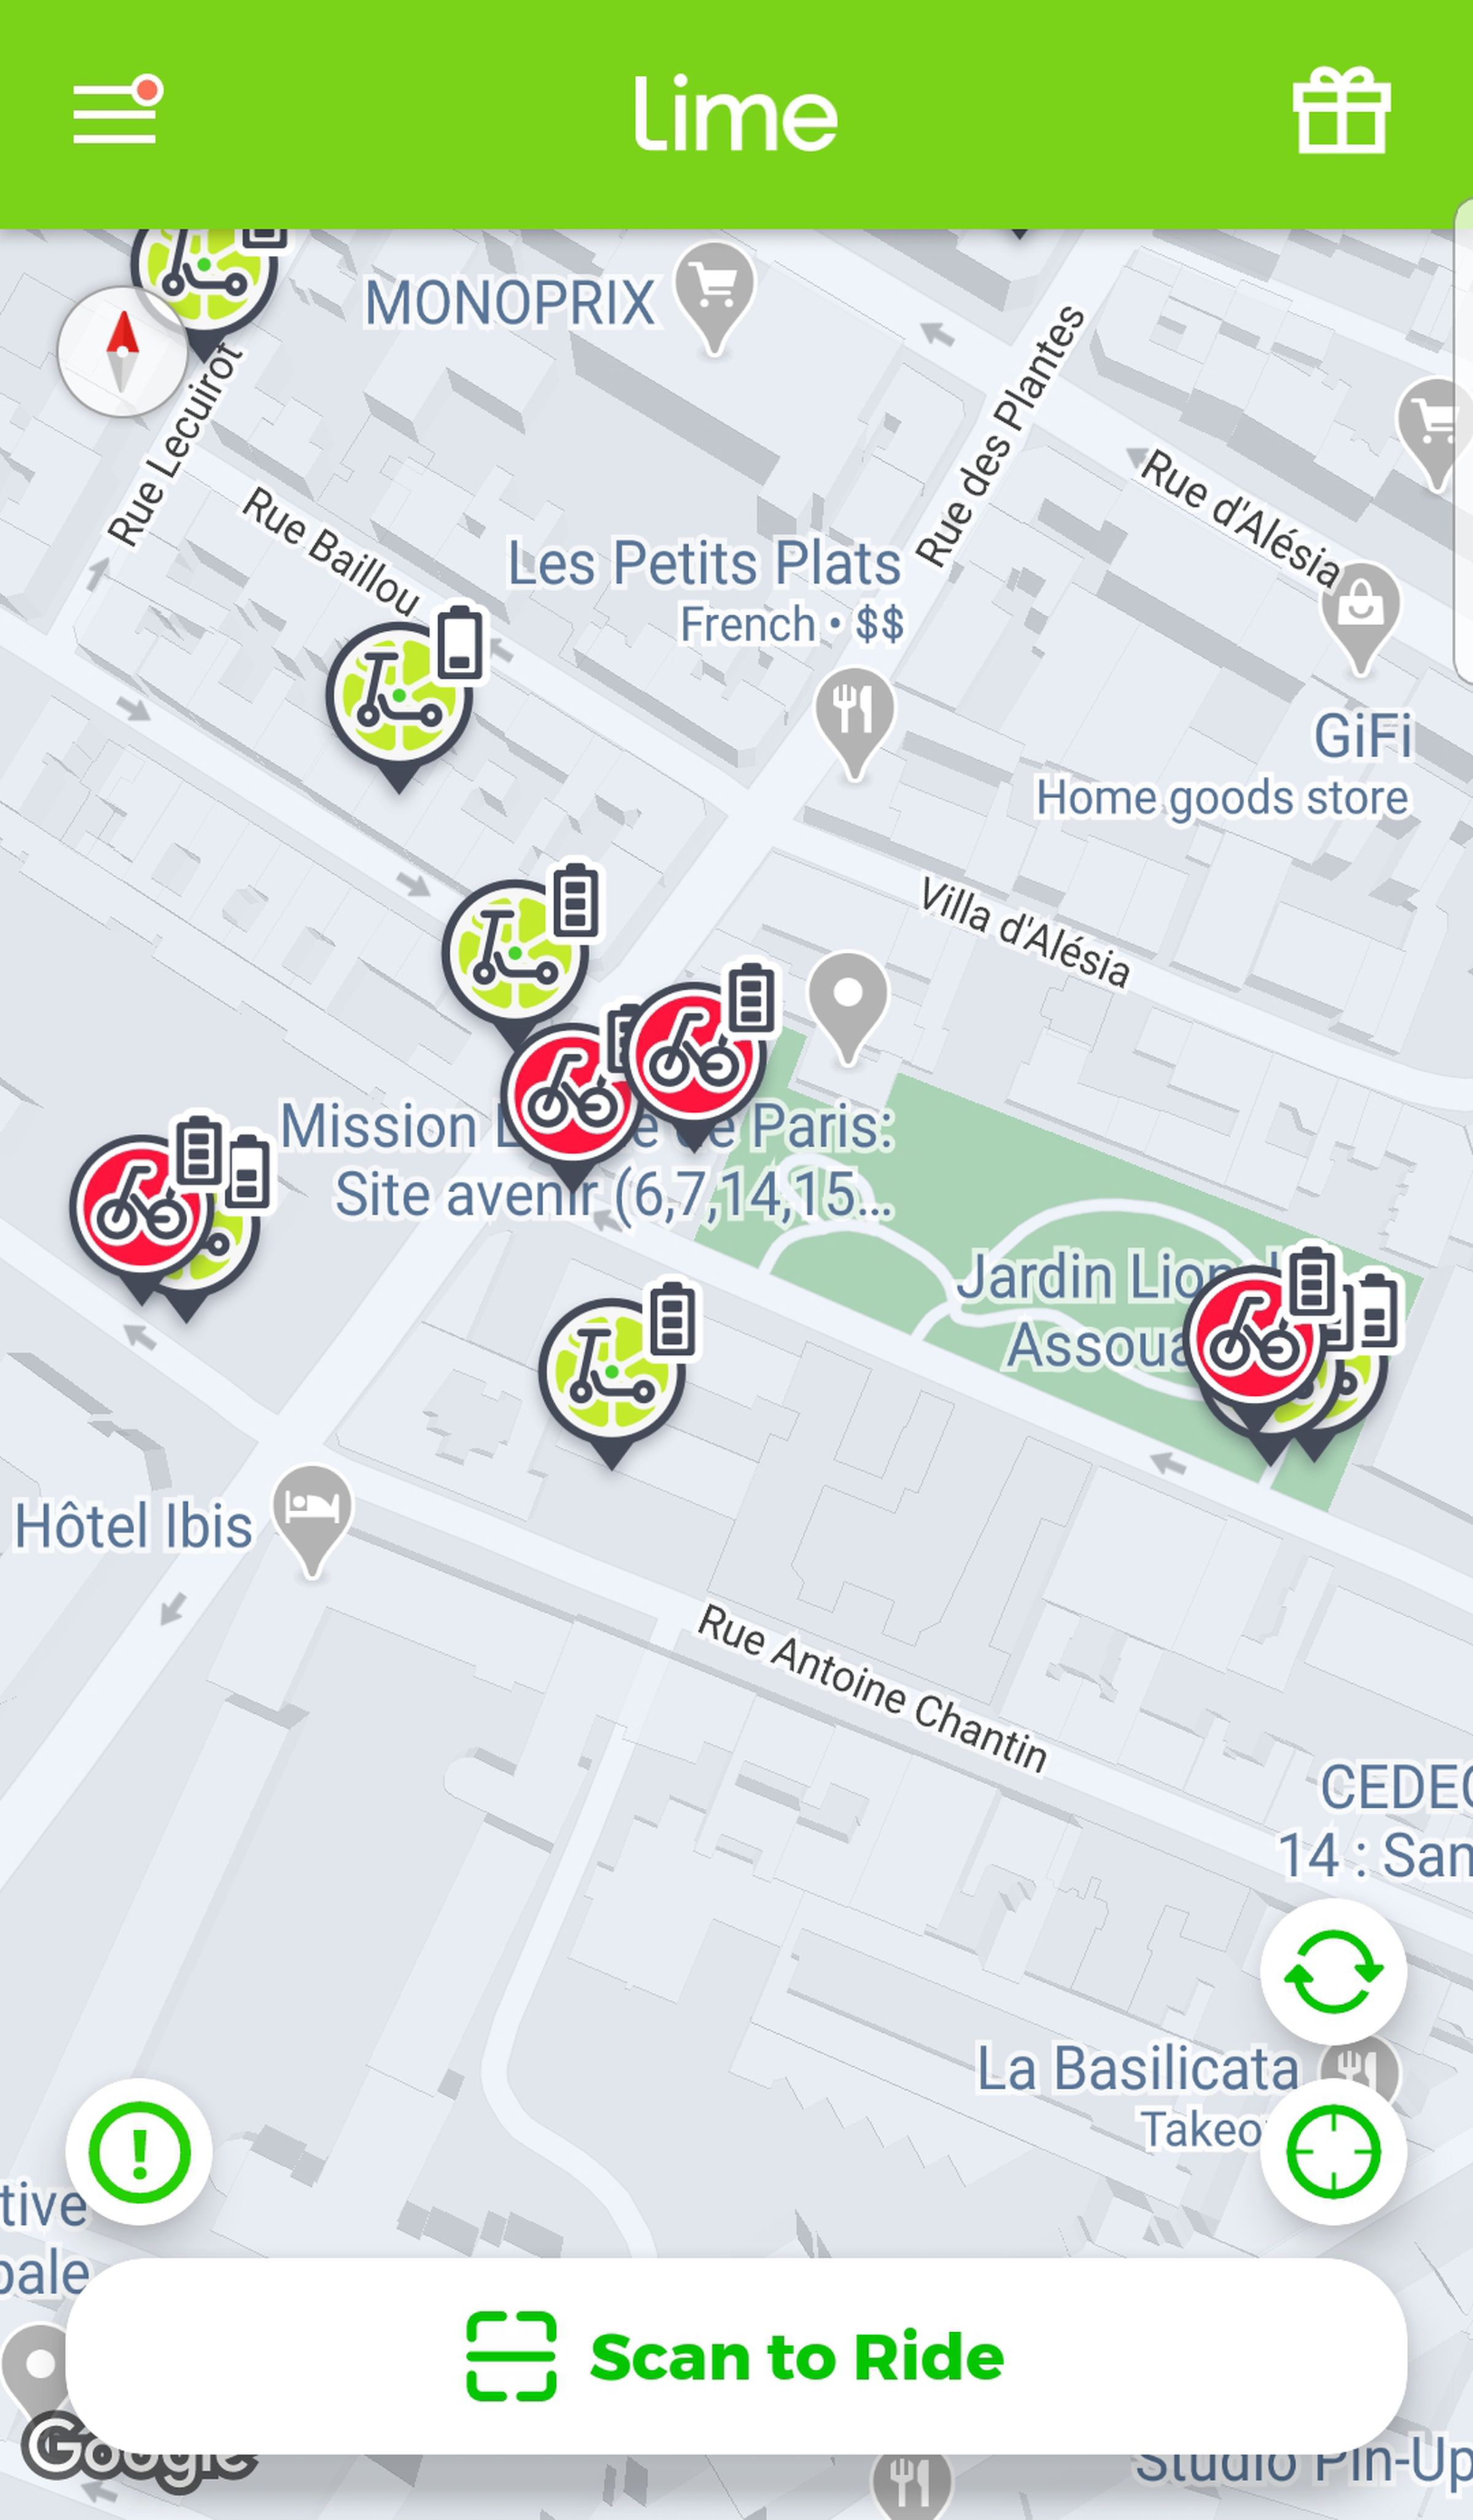 Jump e-bikes will appear in the Lime app in red.